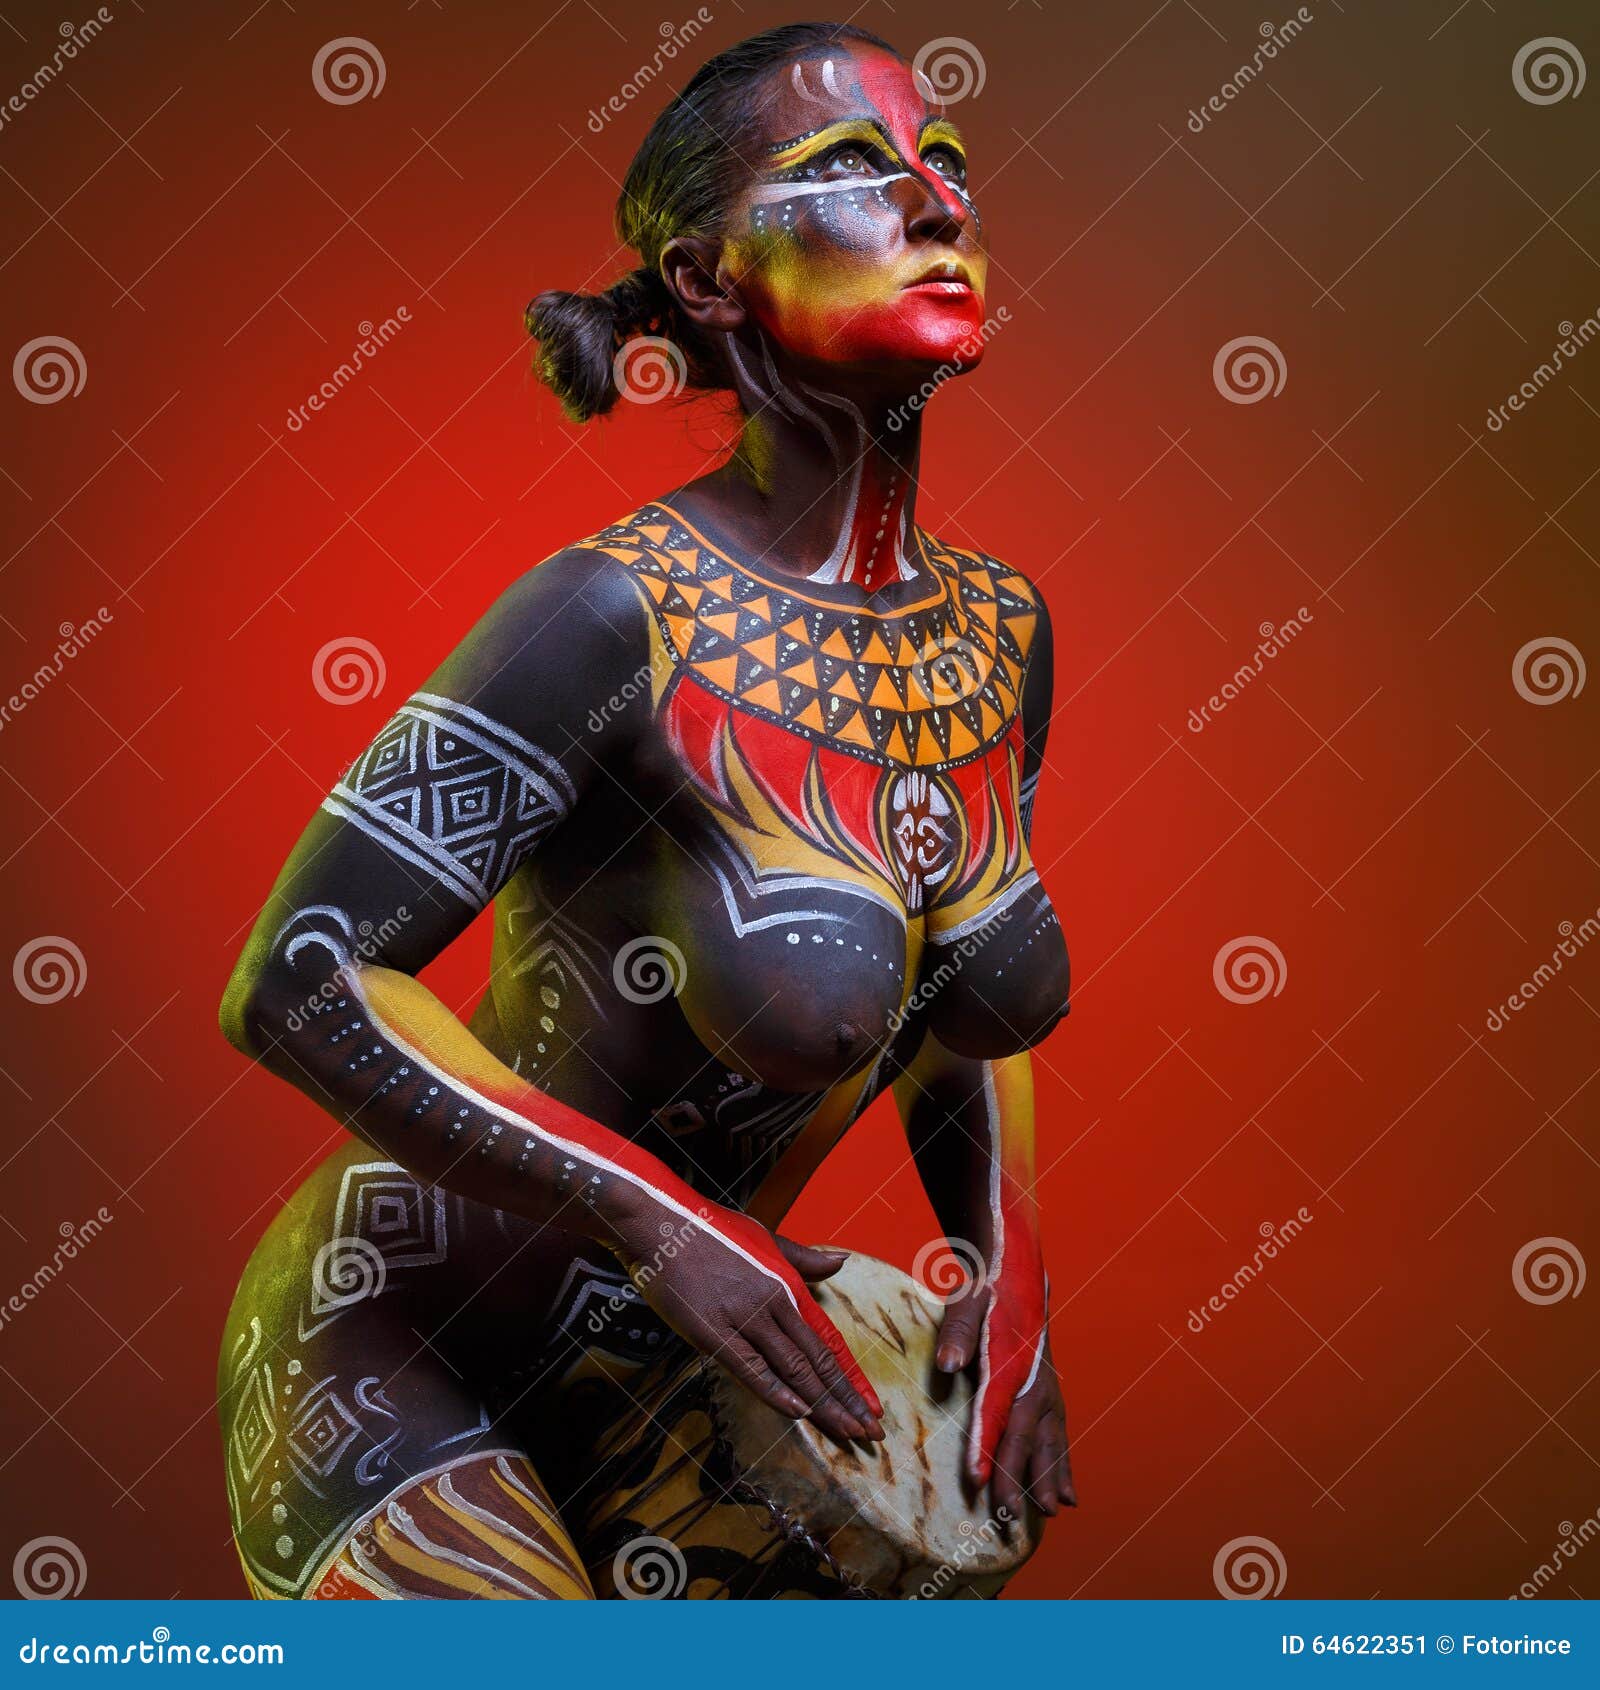 alfred oppelt recommends Women Body Painting Images